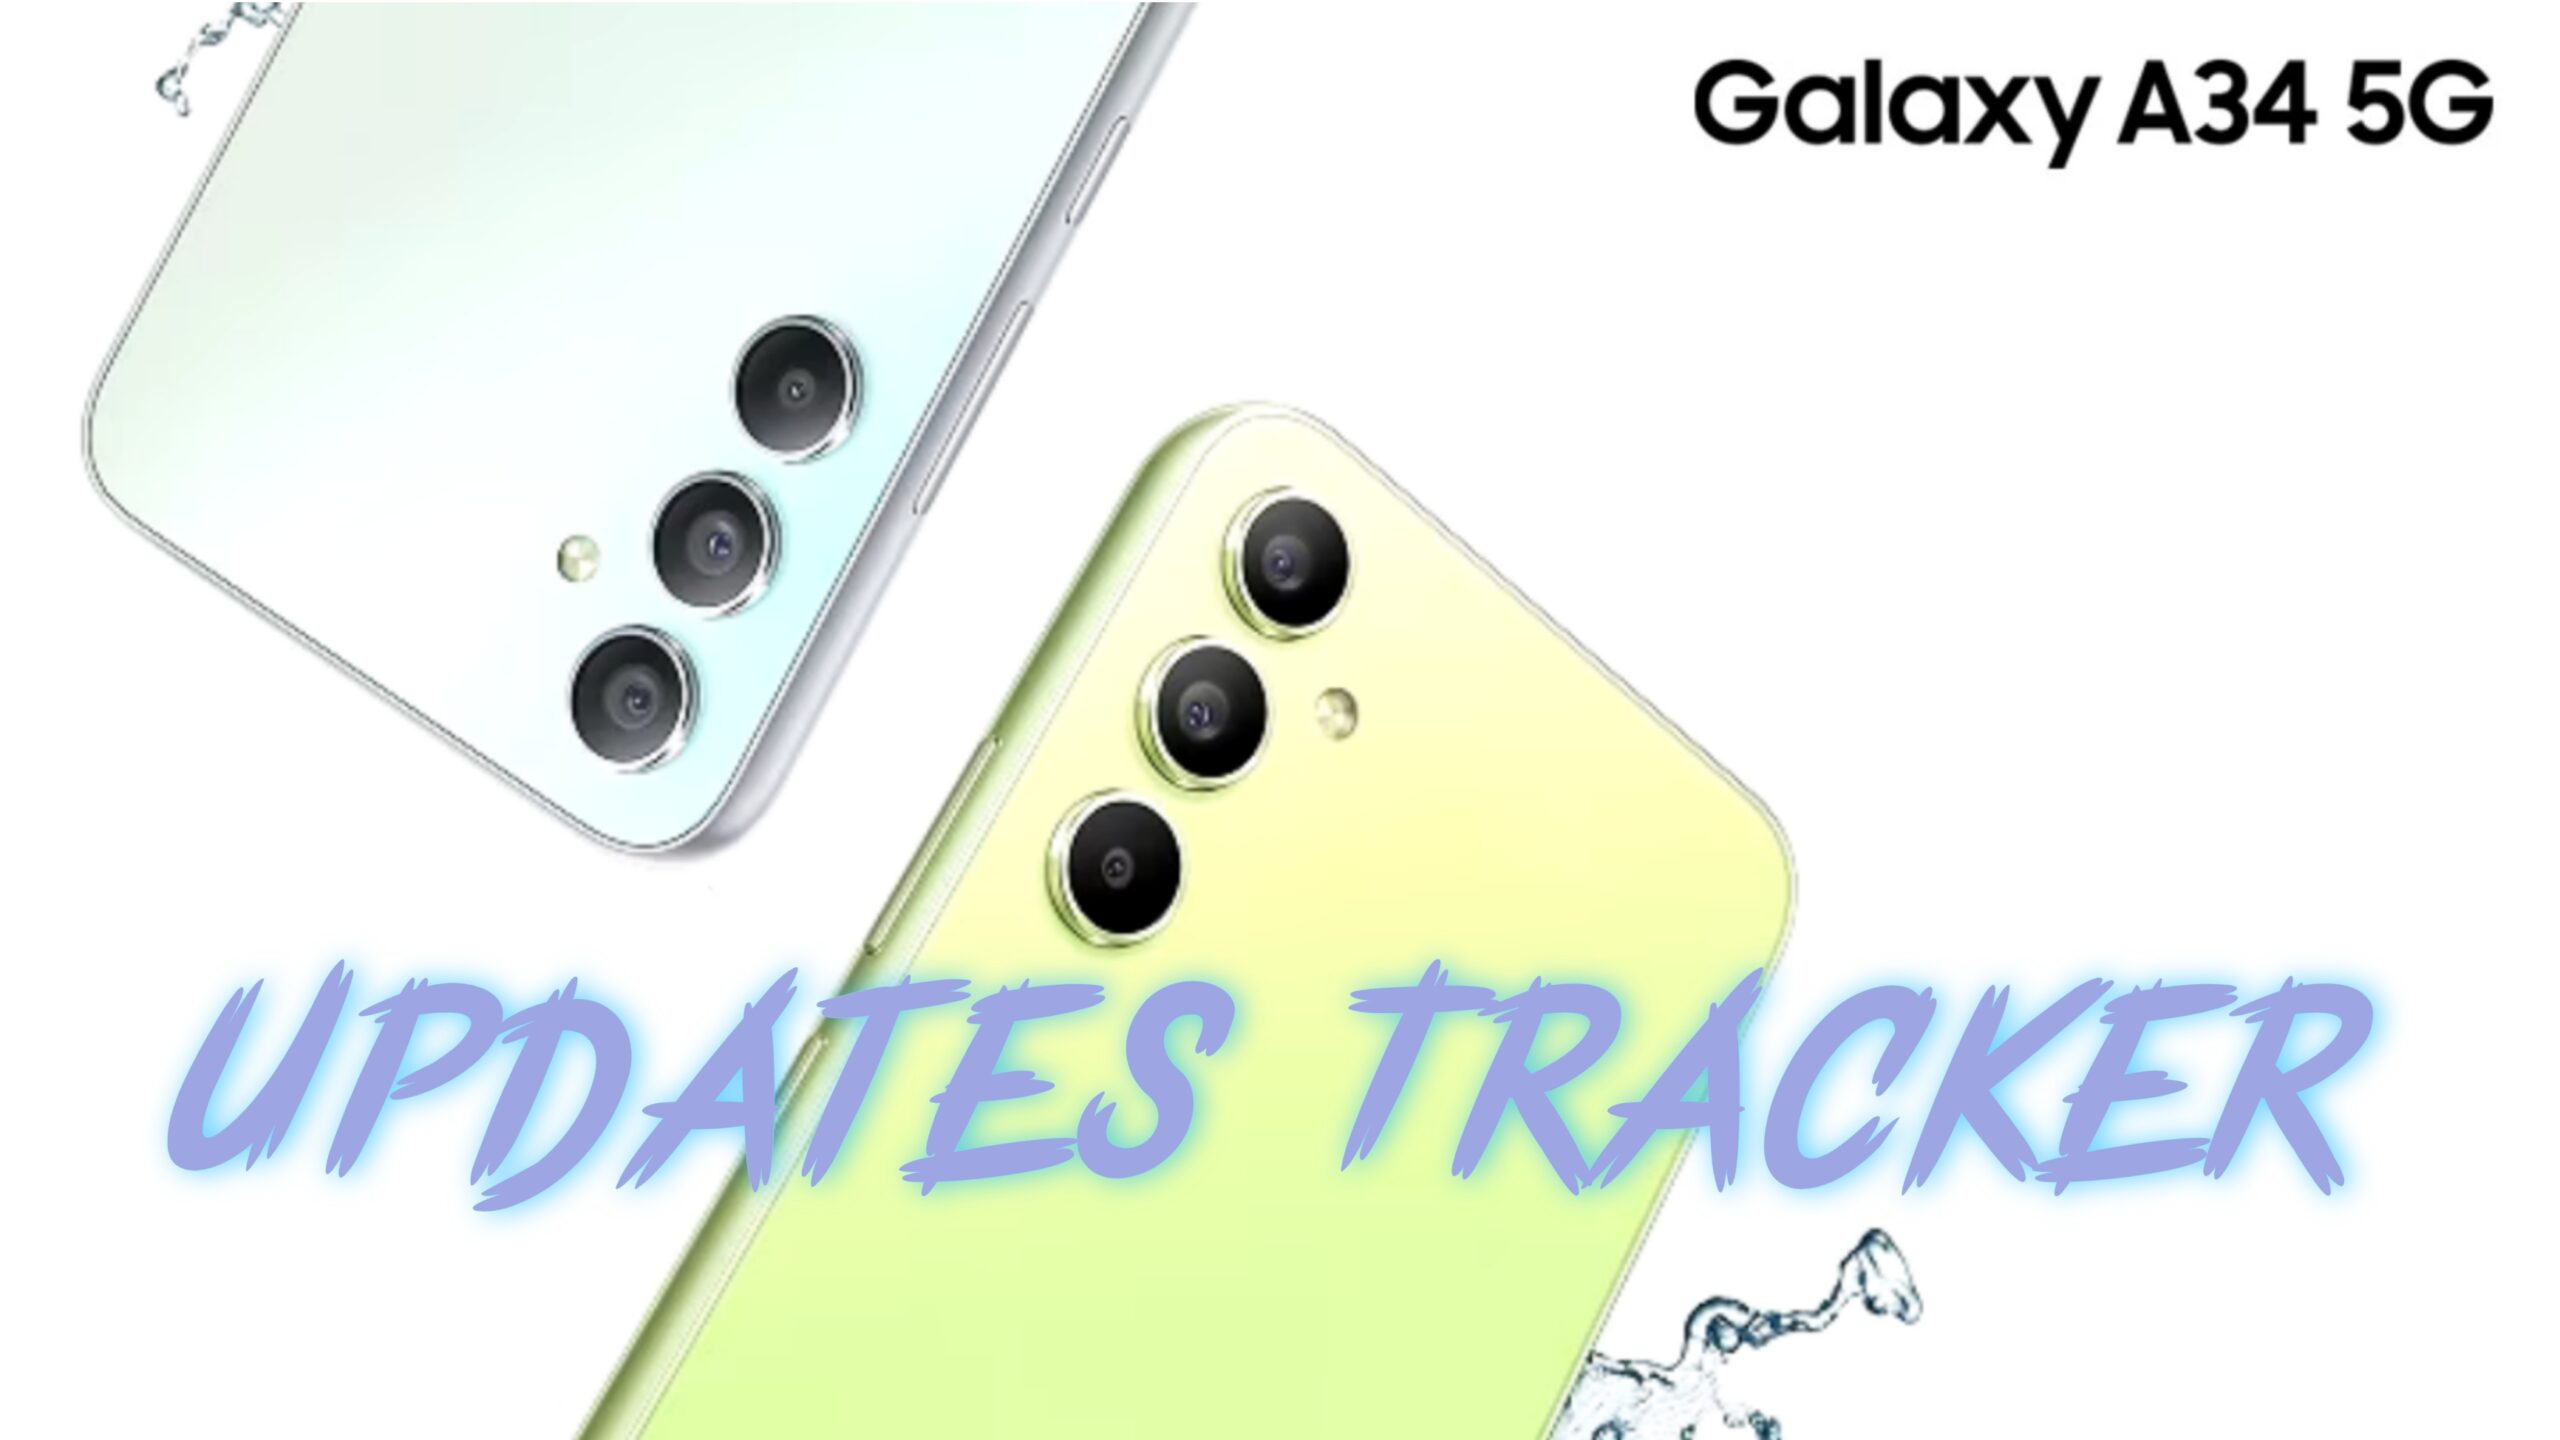 samsung galaxy a34 updates tracker - the go android